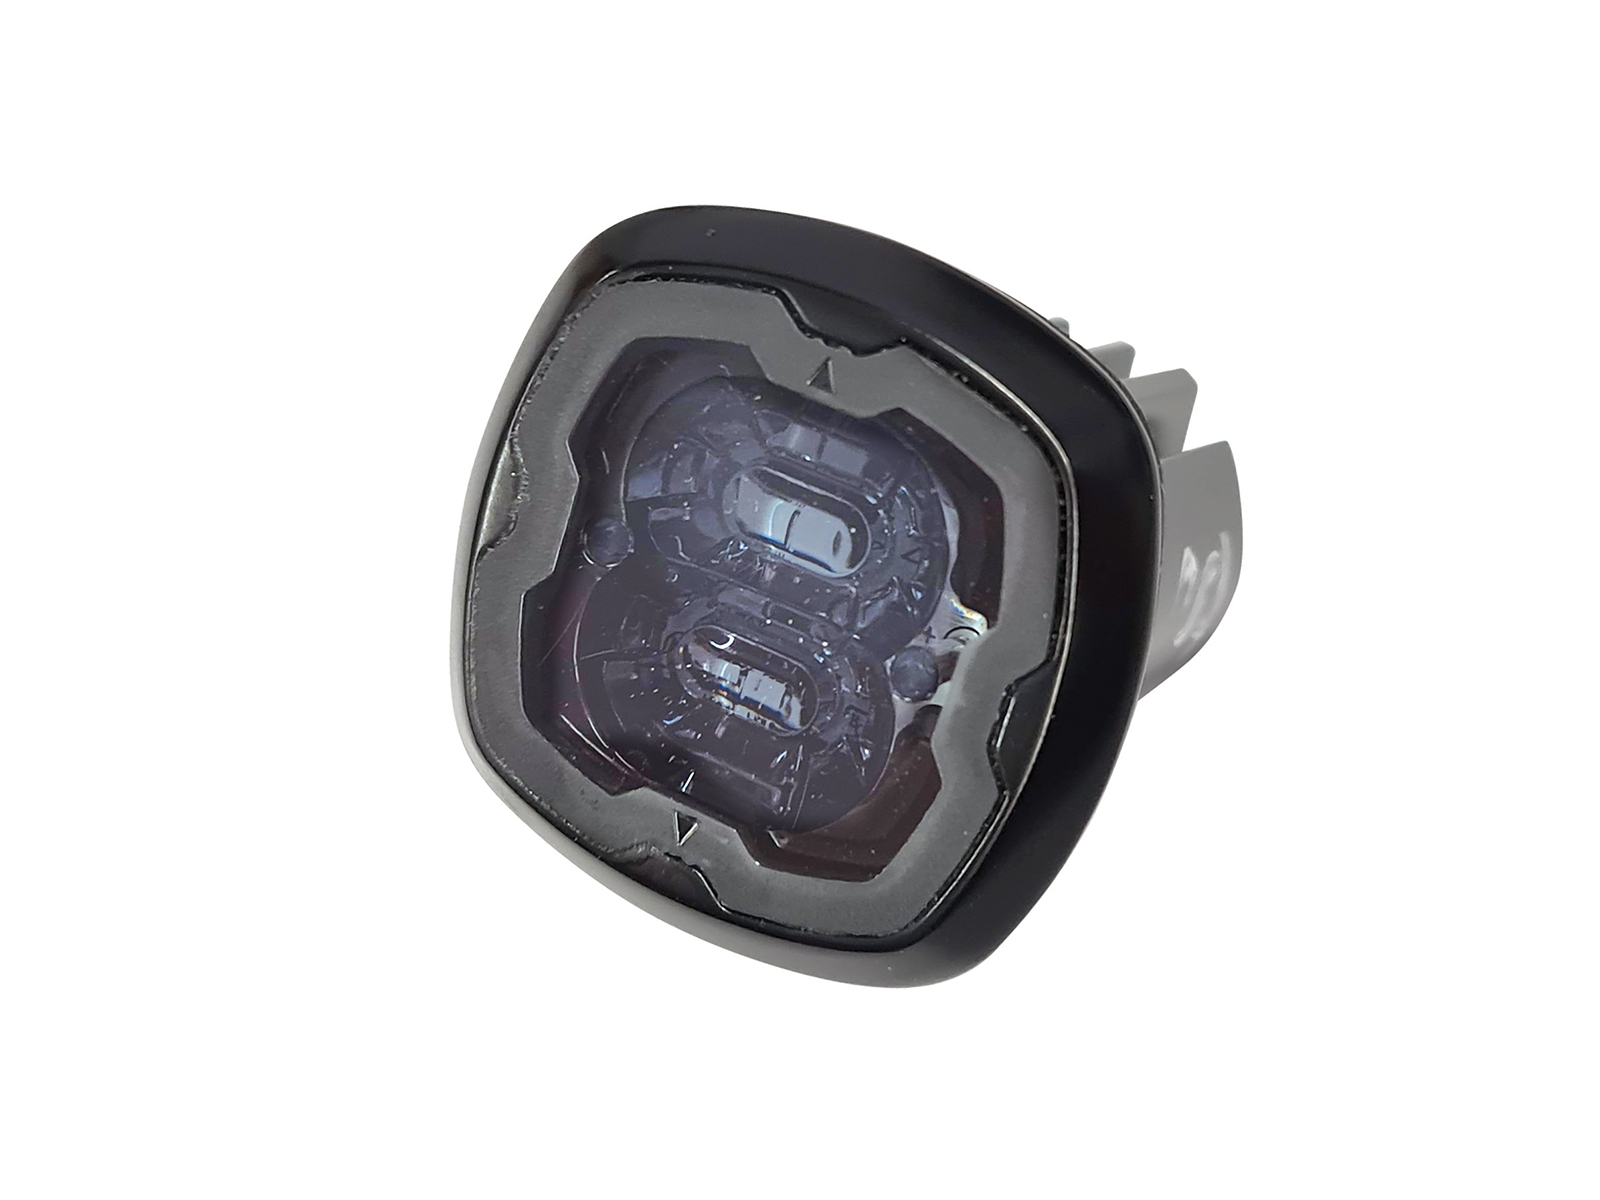 Pop-n-Lock LED Module (CR06) Smoked Lens Unlit Angle View